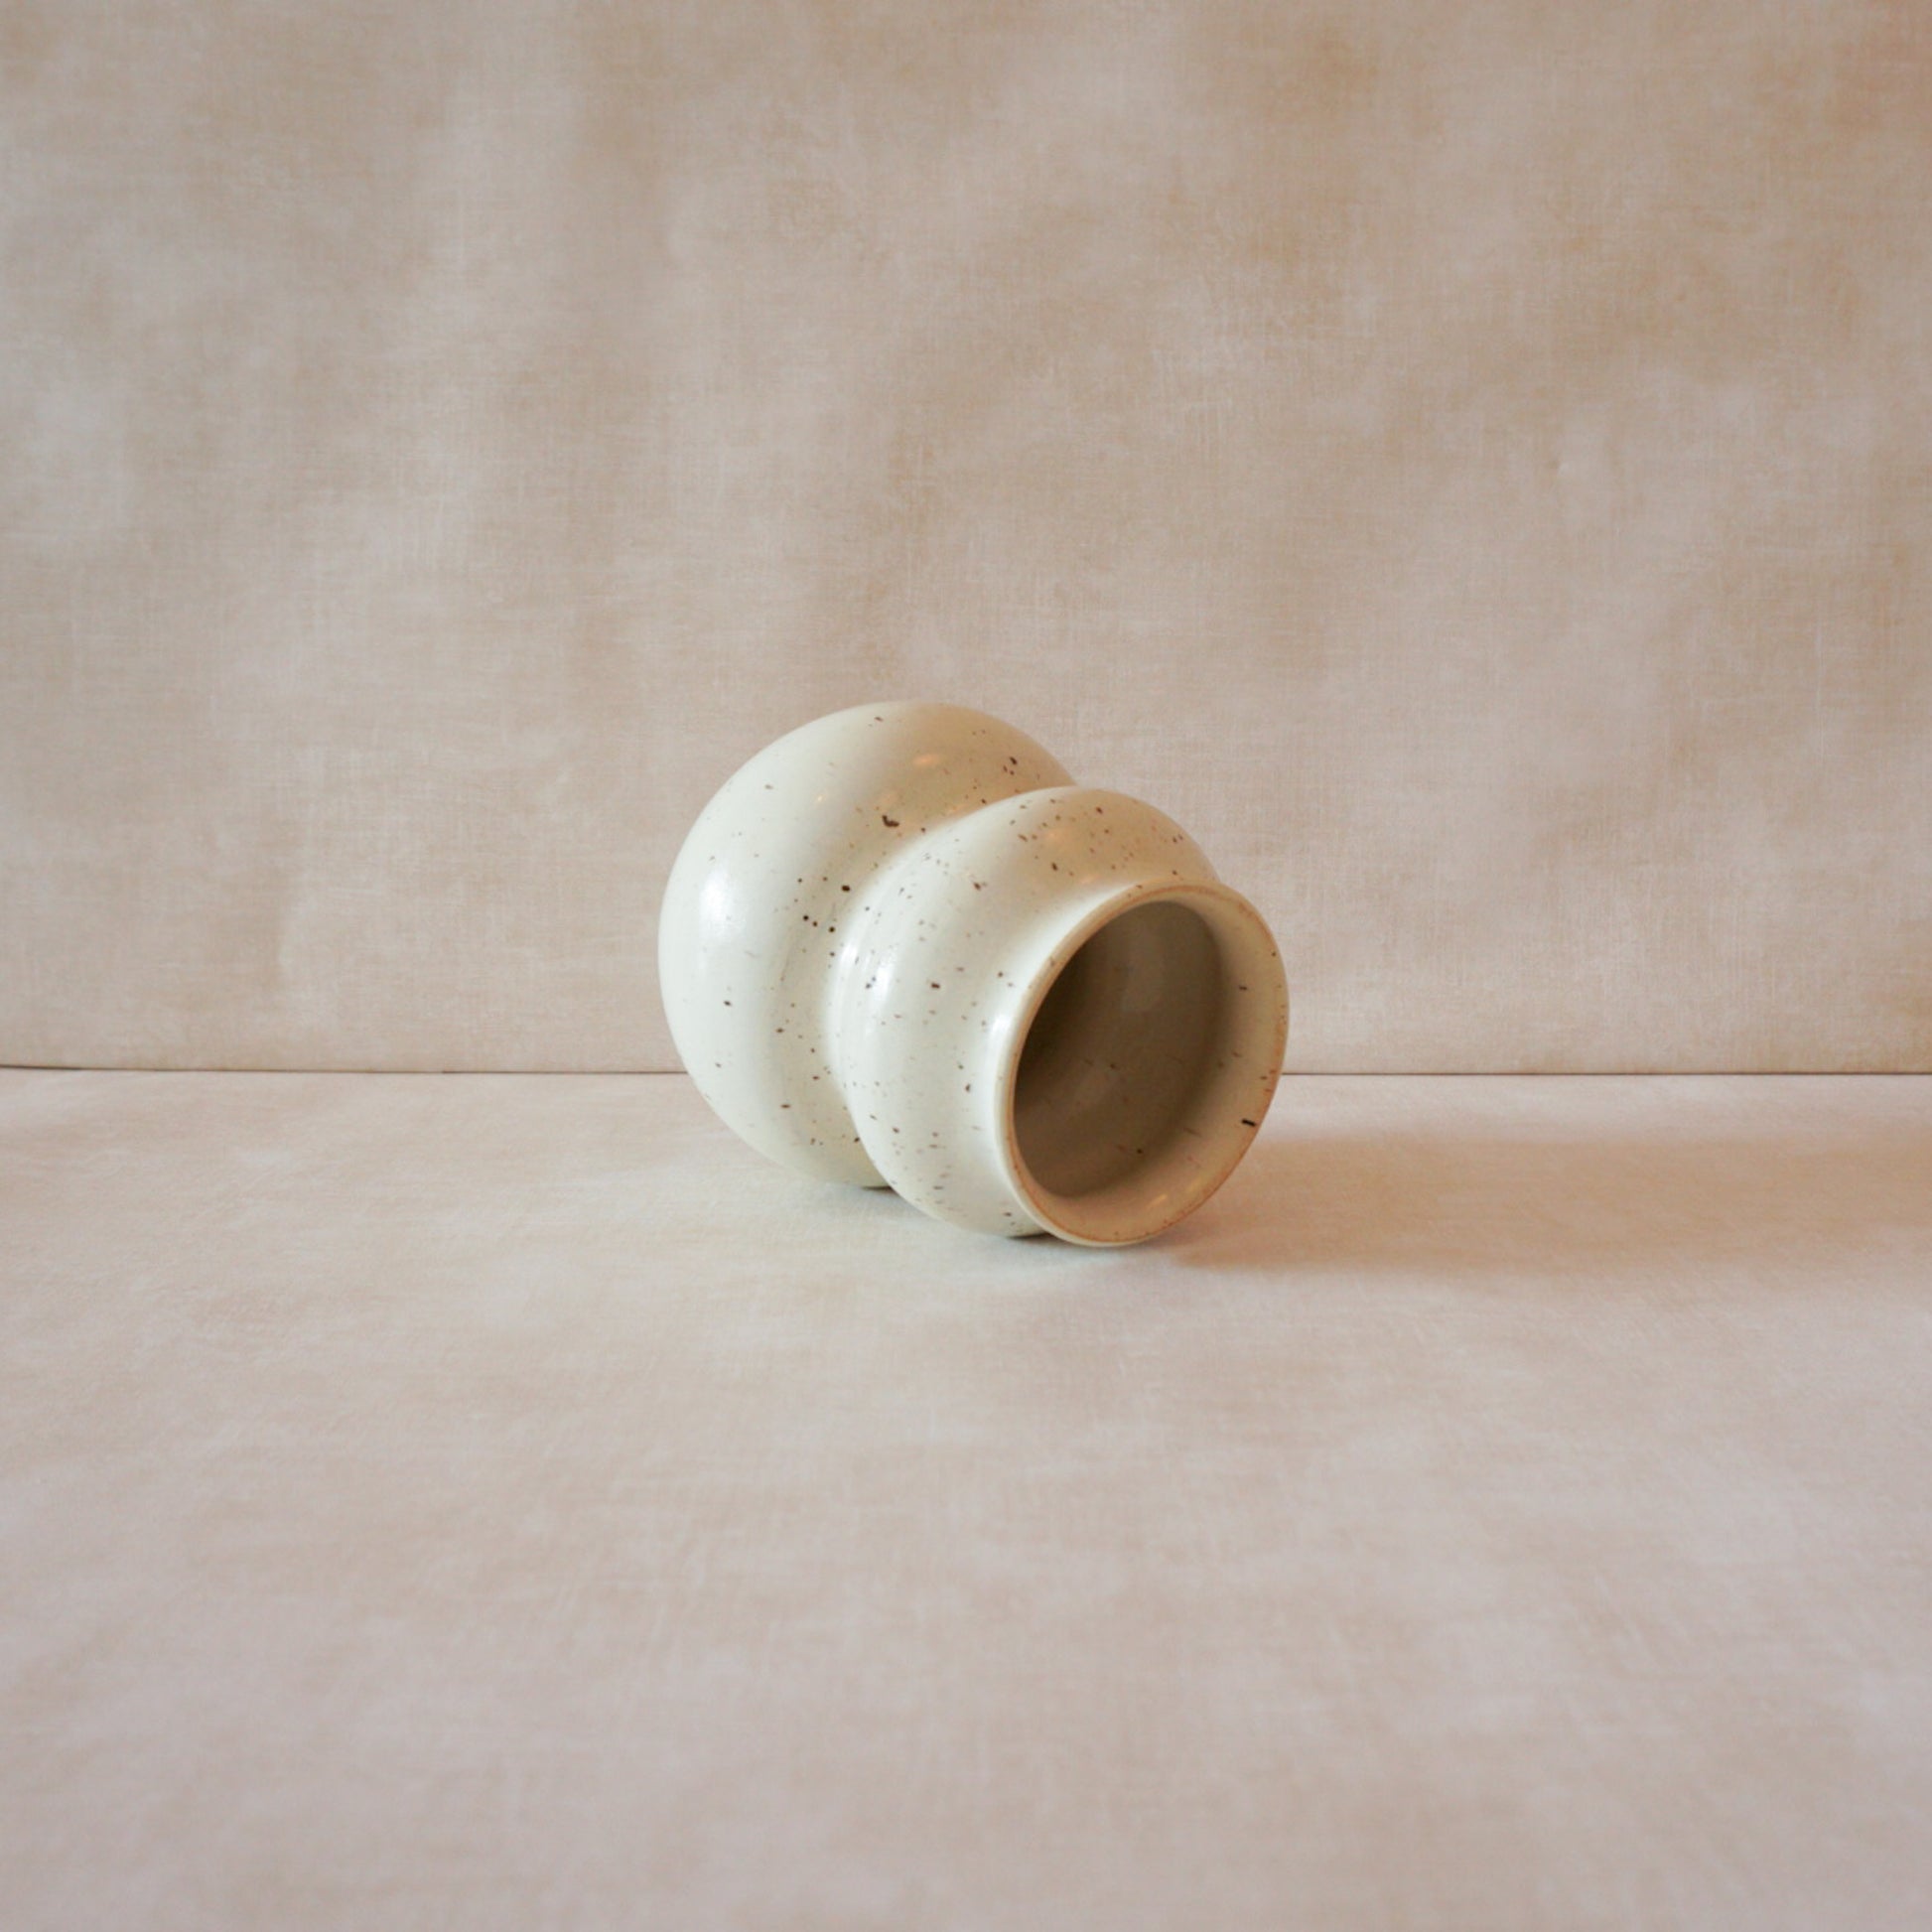 Minimalist cream speckled vase with simple yet refined design